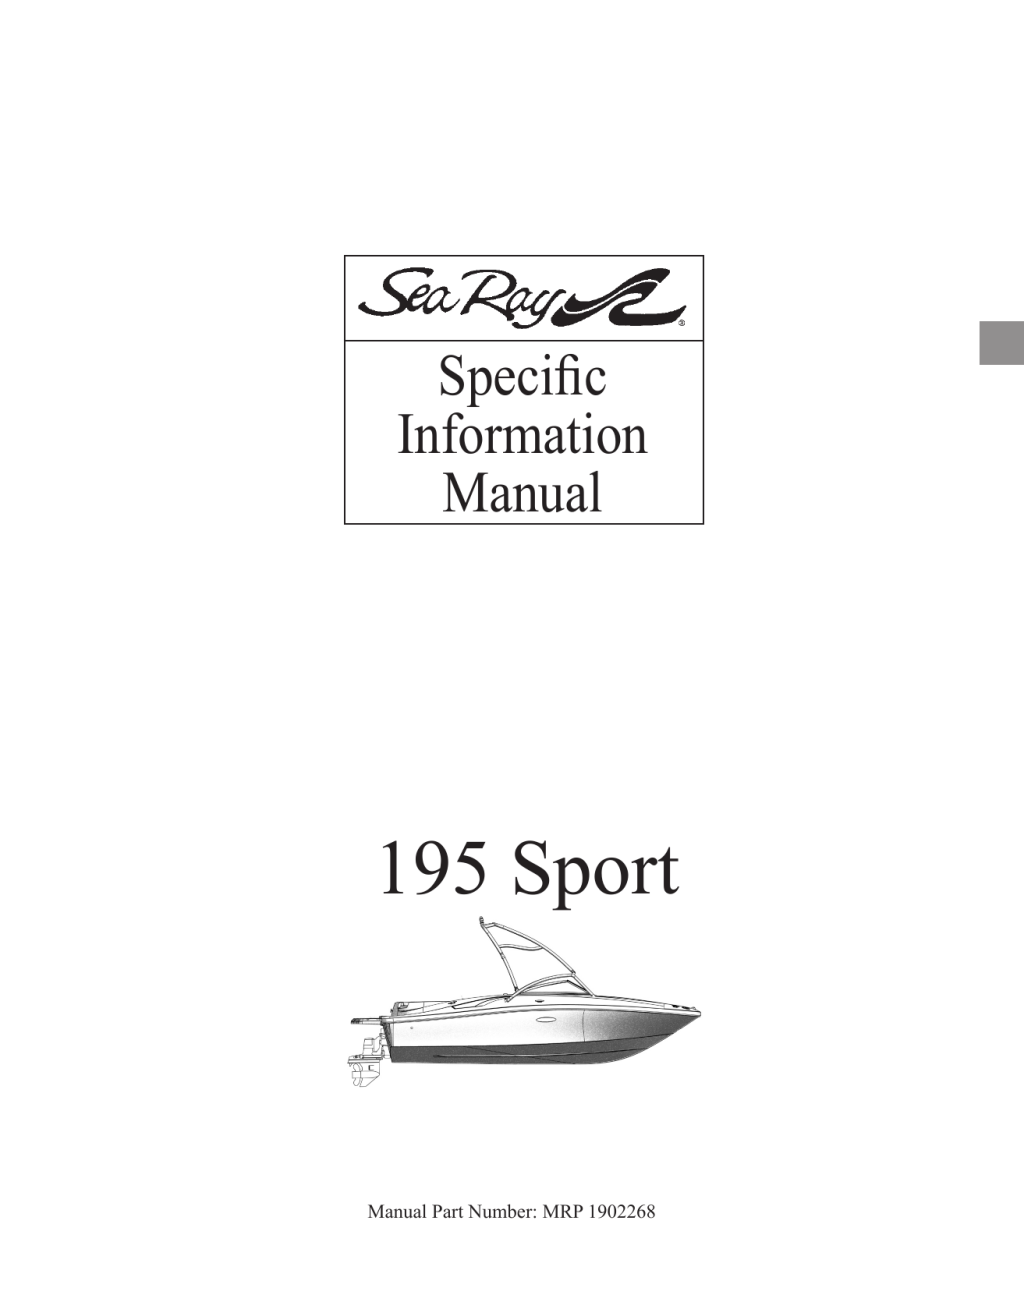 Picture of: Sea Ray   SPORT Owners Manual  Manualzz